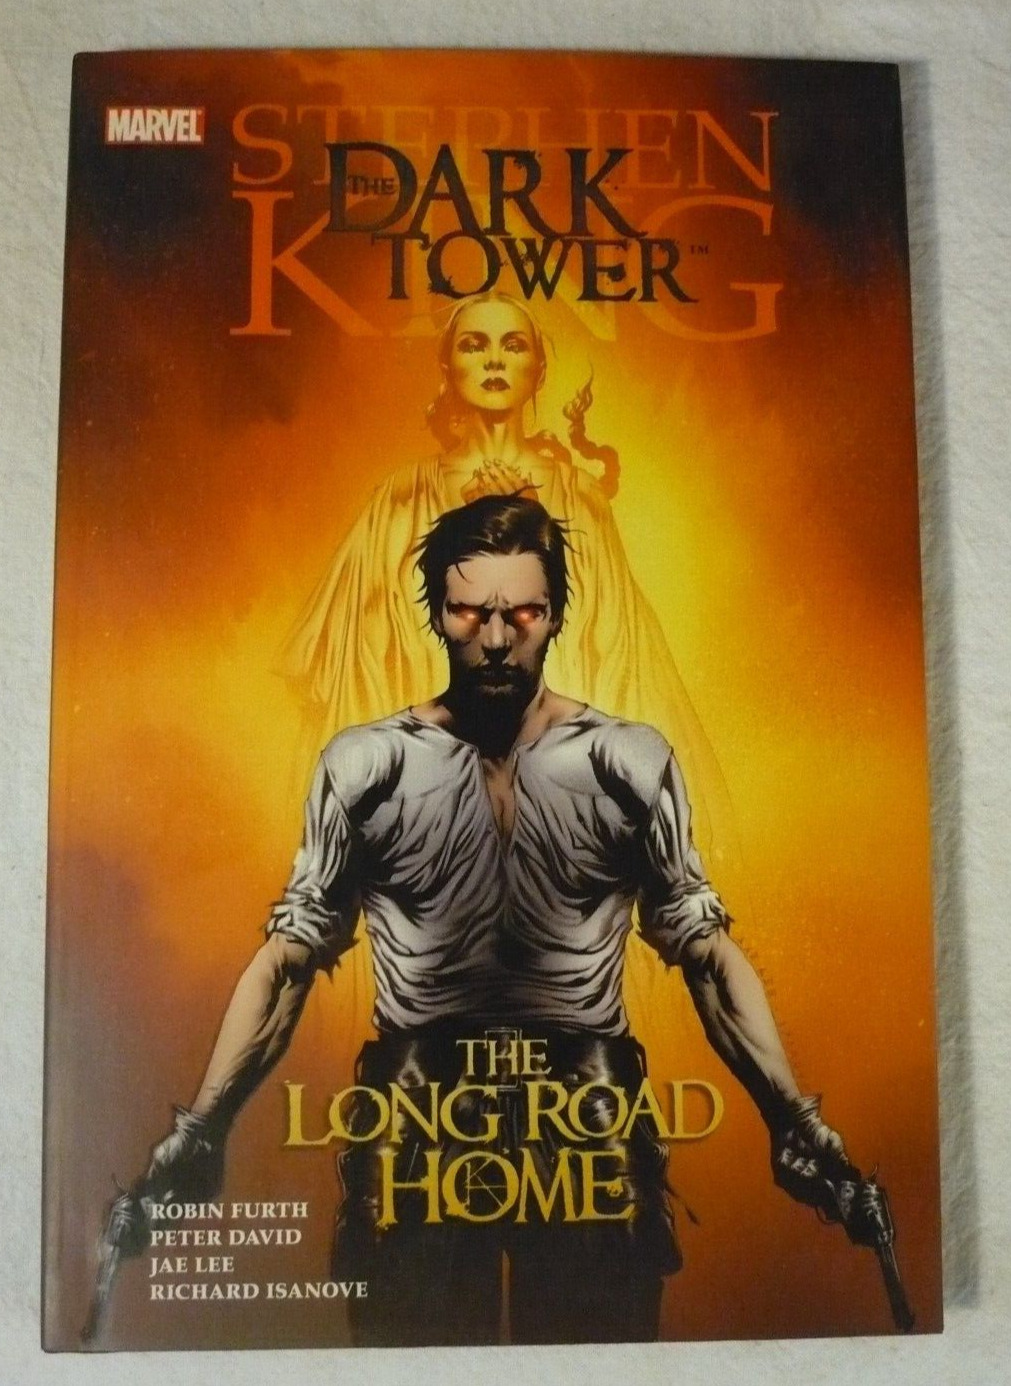 Dark Tower: The Long Road Home - Hardcover By Stephen King